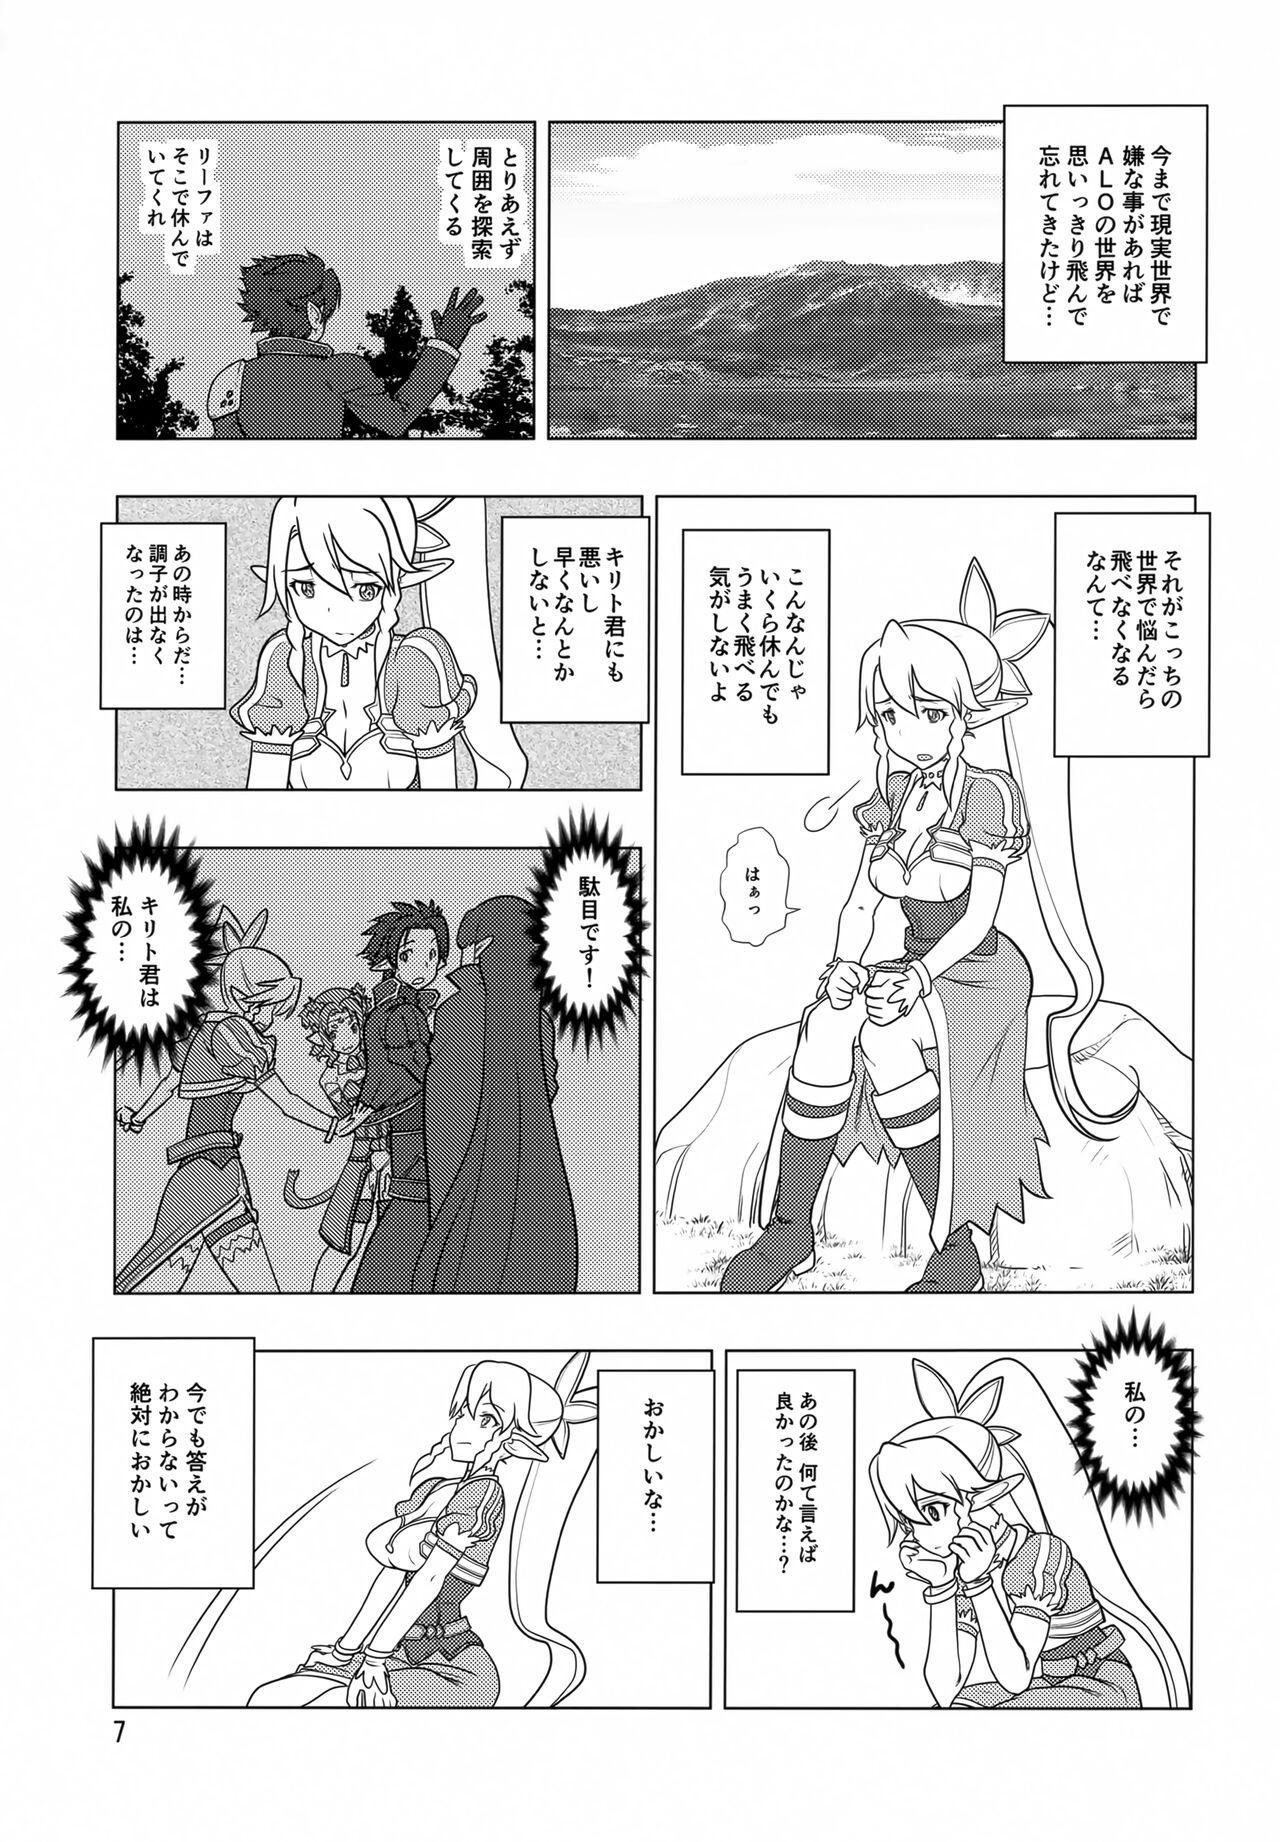 Usa Rifatto - Sword art online Lesbos - Page 6